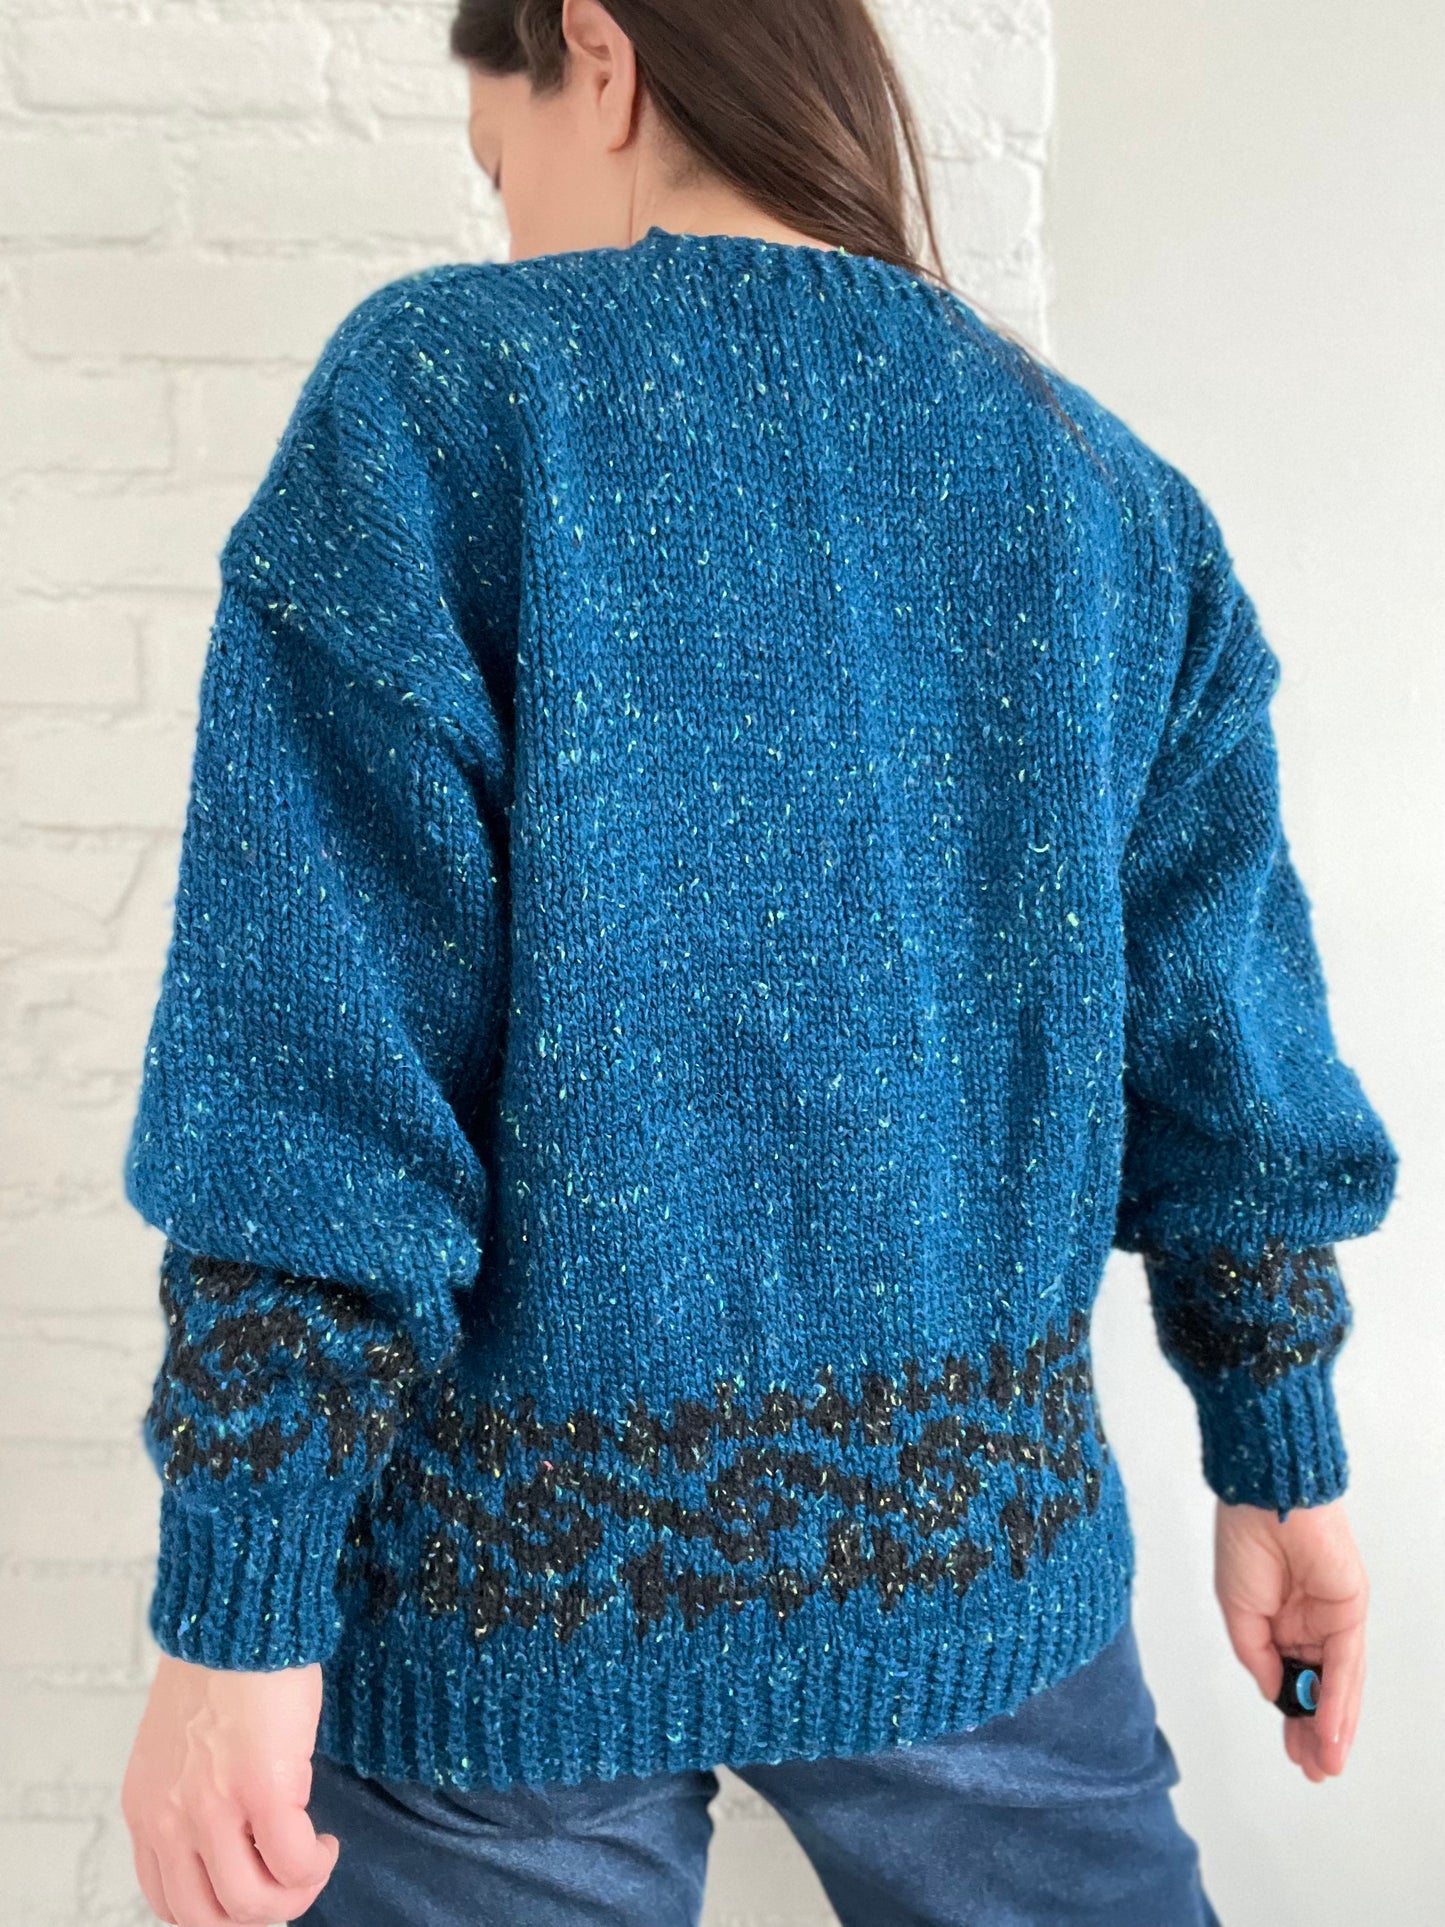 Chunky Teal Speckle Sweater - S-L